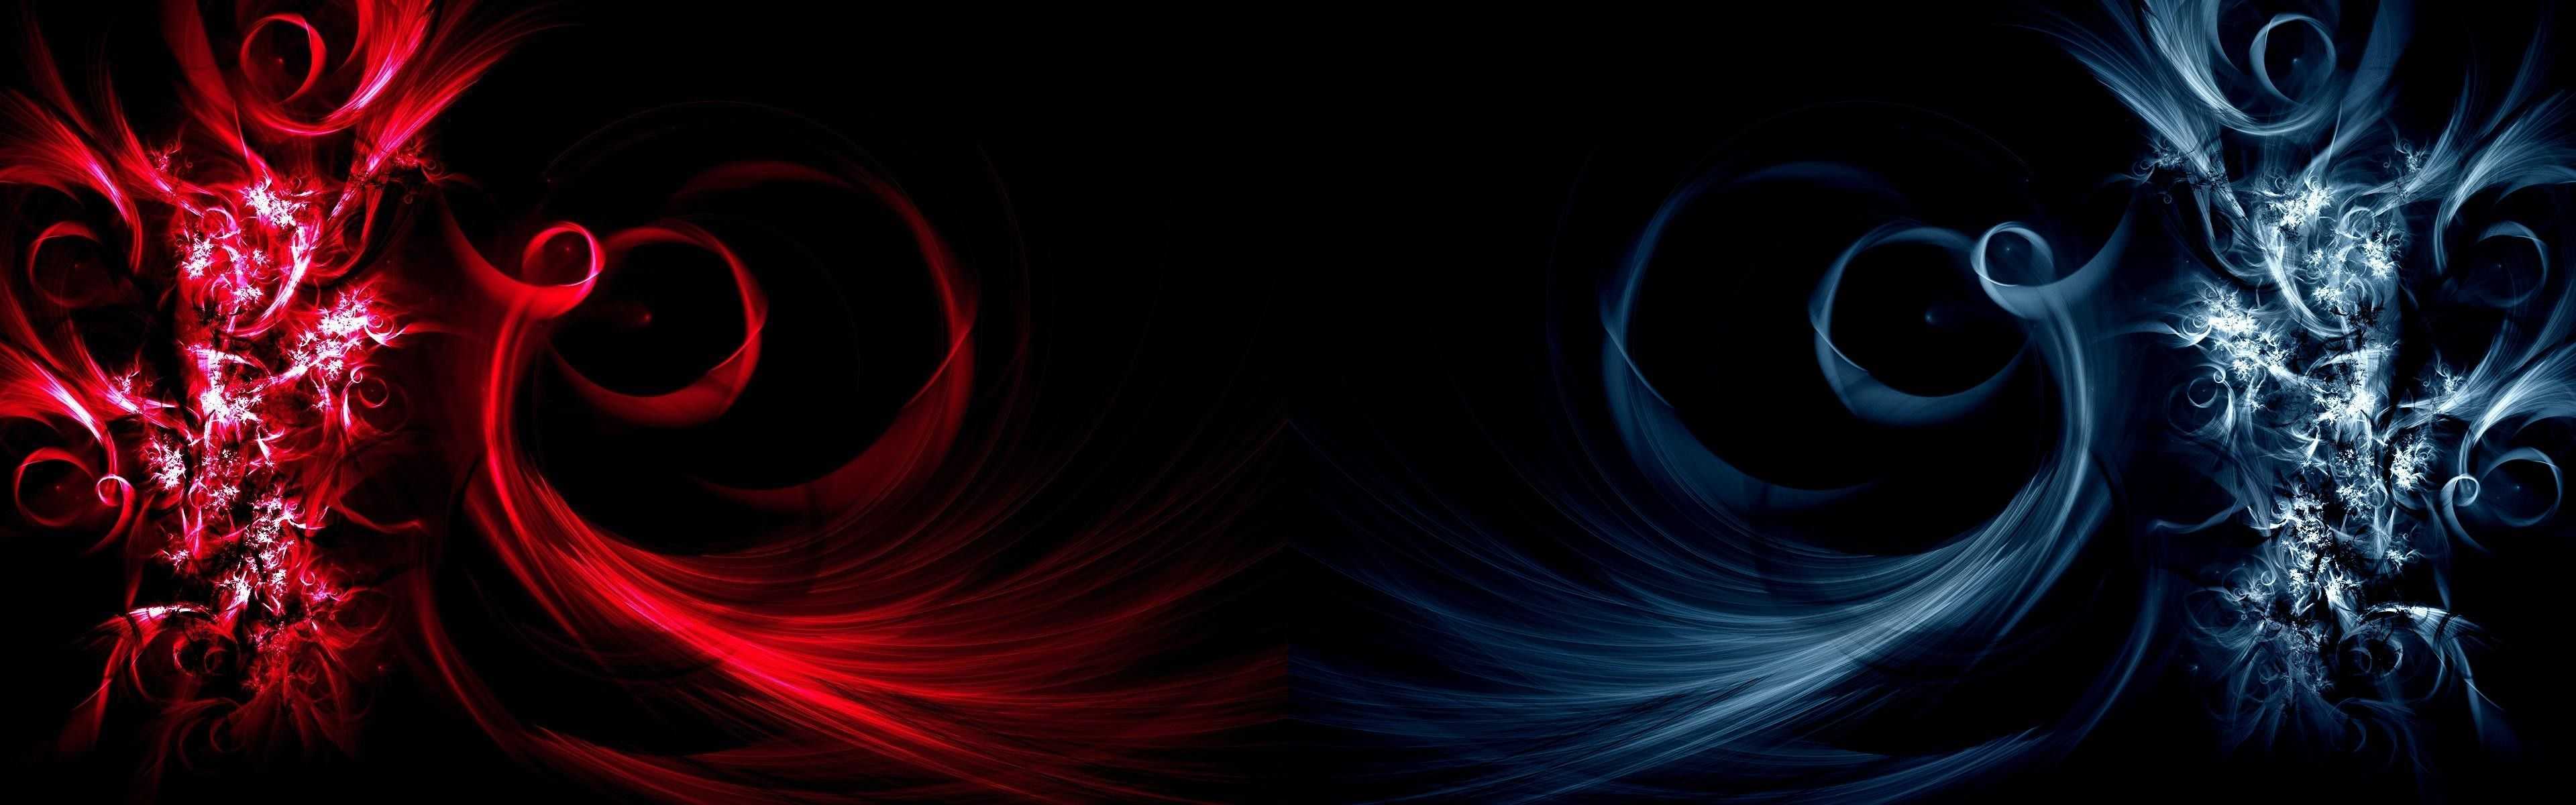 32:9 Super Ultrawide Wallpaper | Free Wallpapers for 3840x1080 and 5120x1440  Resolution Displays